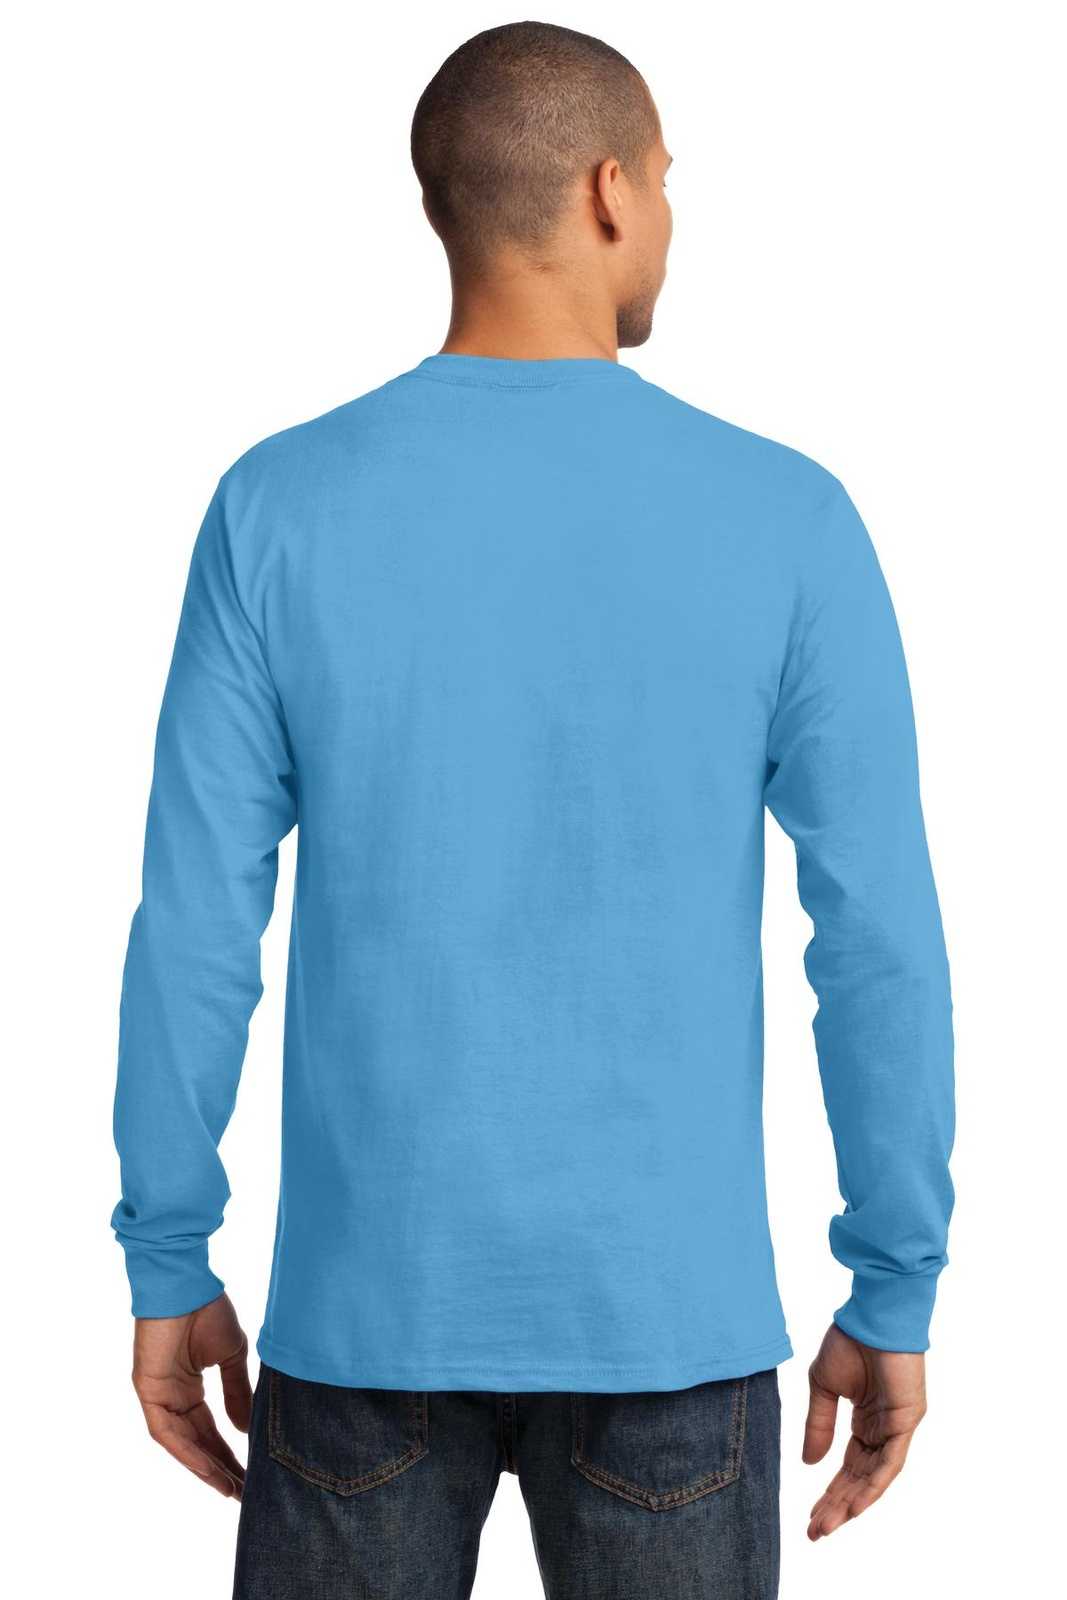 Port &amp; Company PC61LST Tall Long Sleeve Essential Tee - Aquatic Blue - HIT a Double - 2